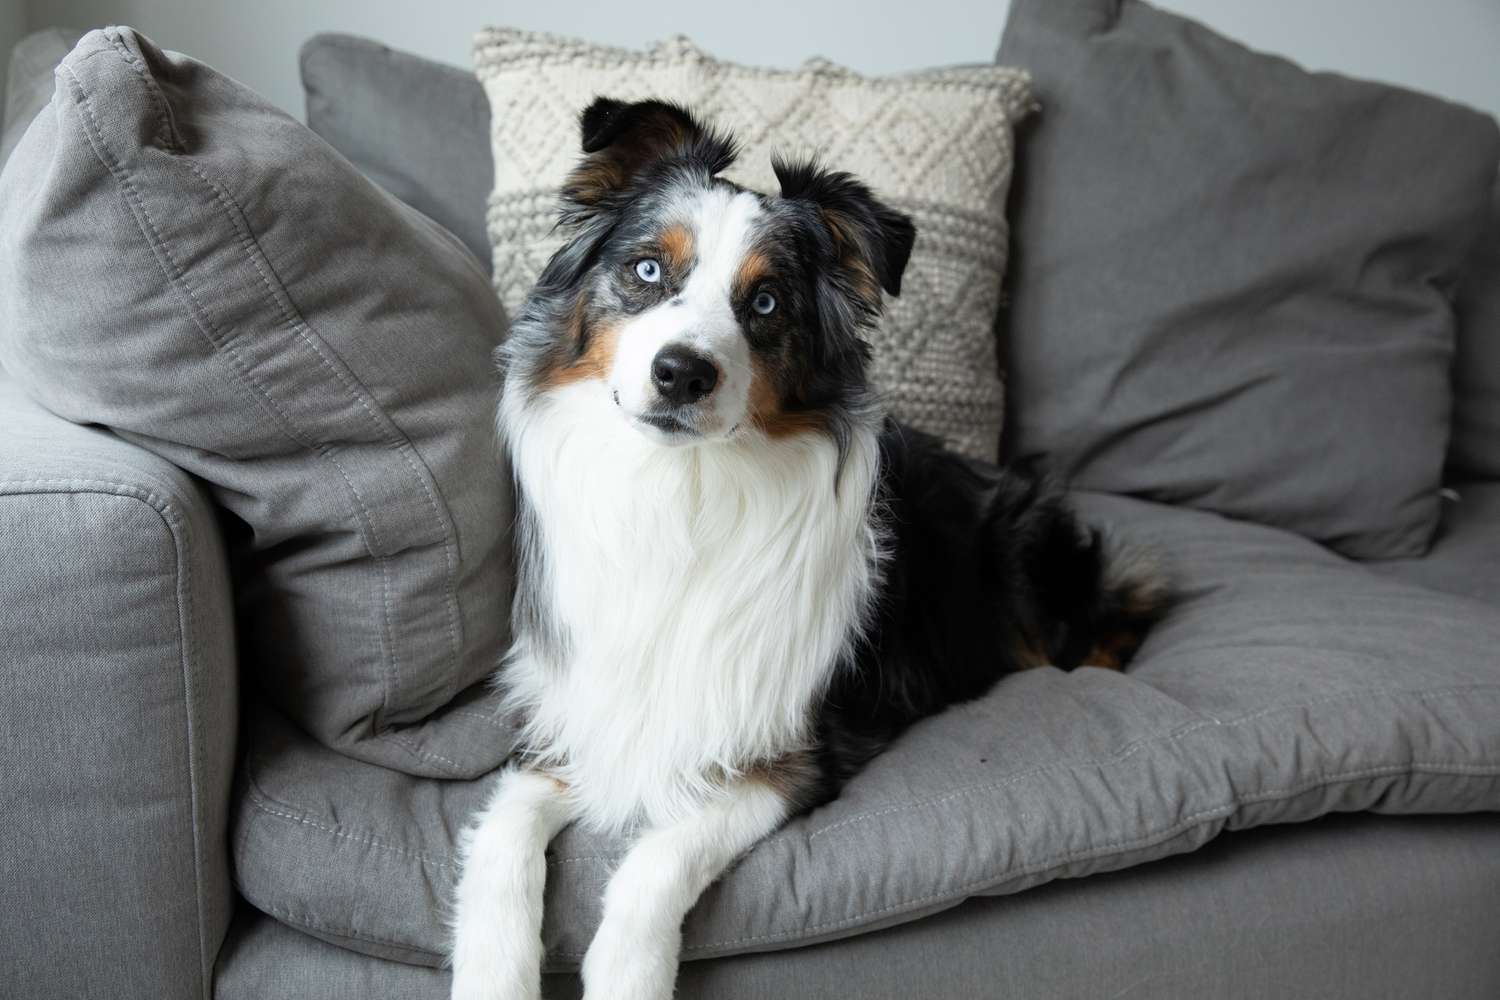 White, black and brown Australian shepherd dog laying on gray couch